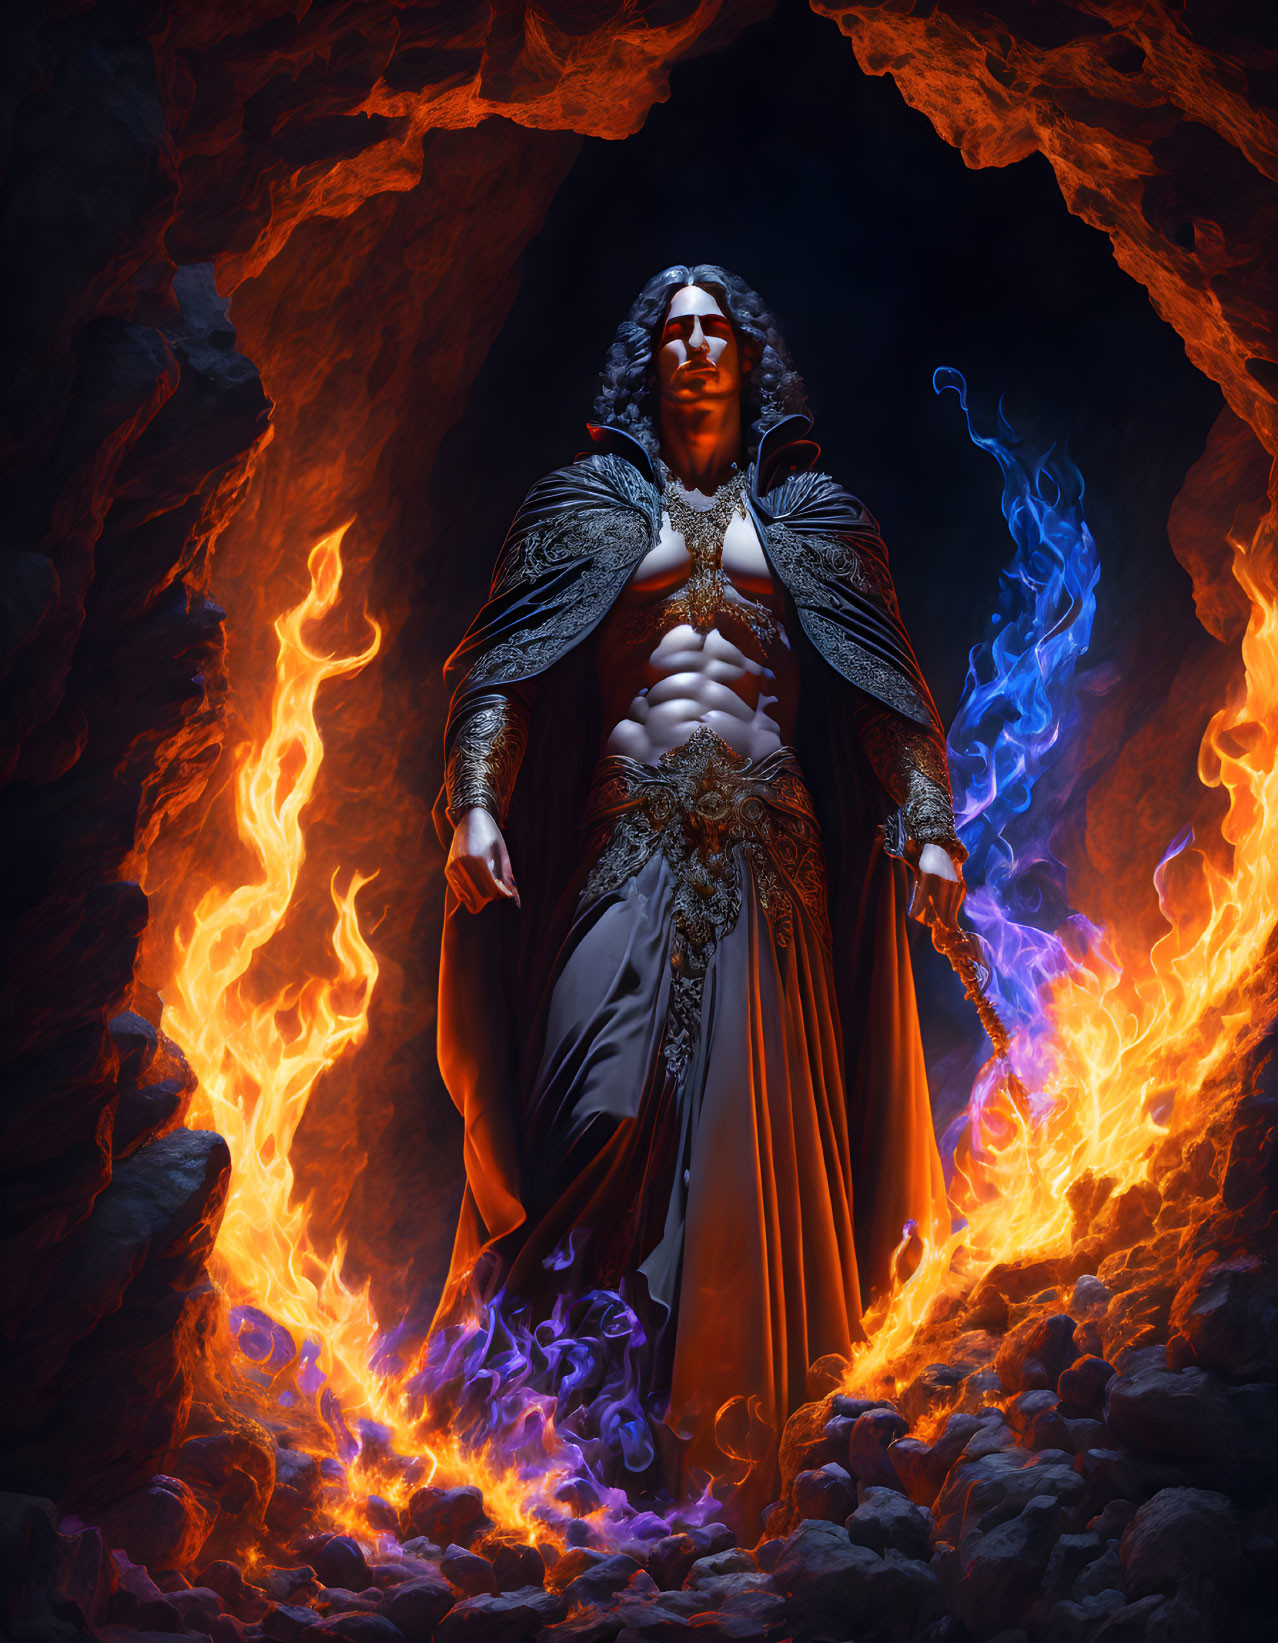 Pale-skinned figure in ornate garments holding blue flames in fiery cave